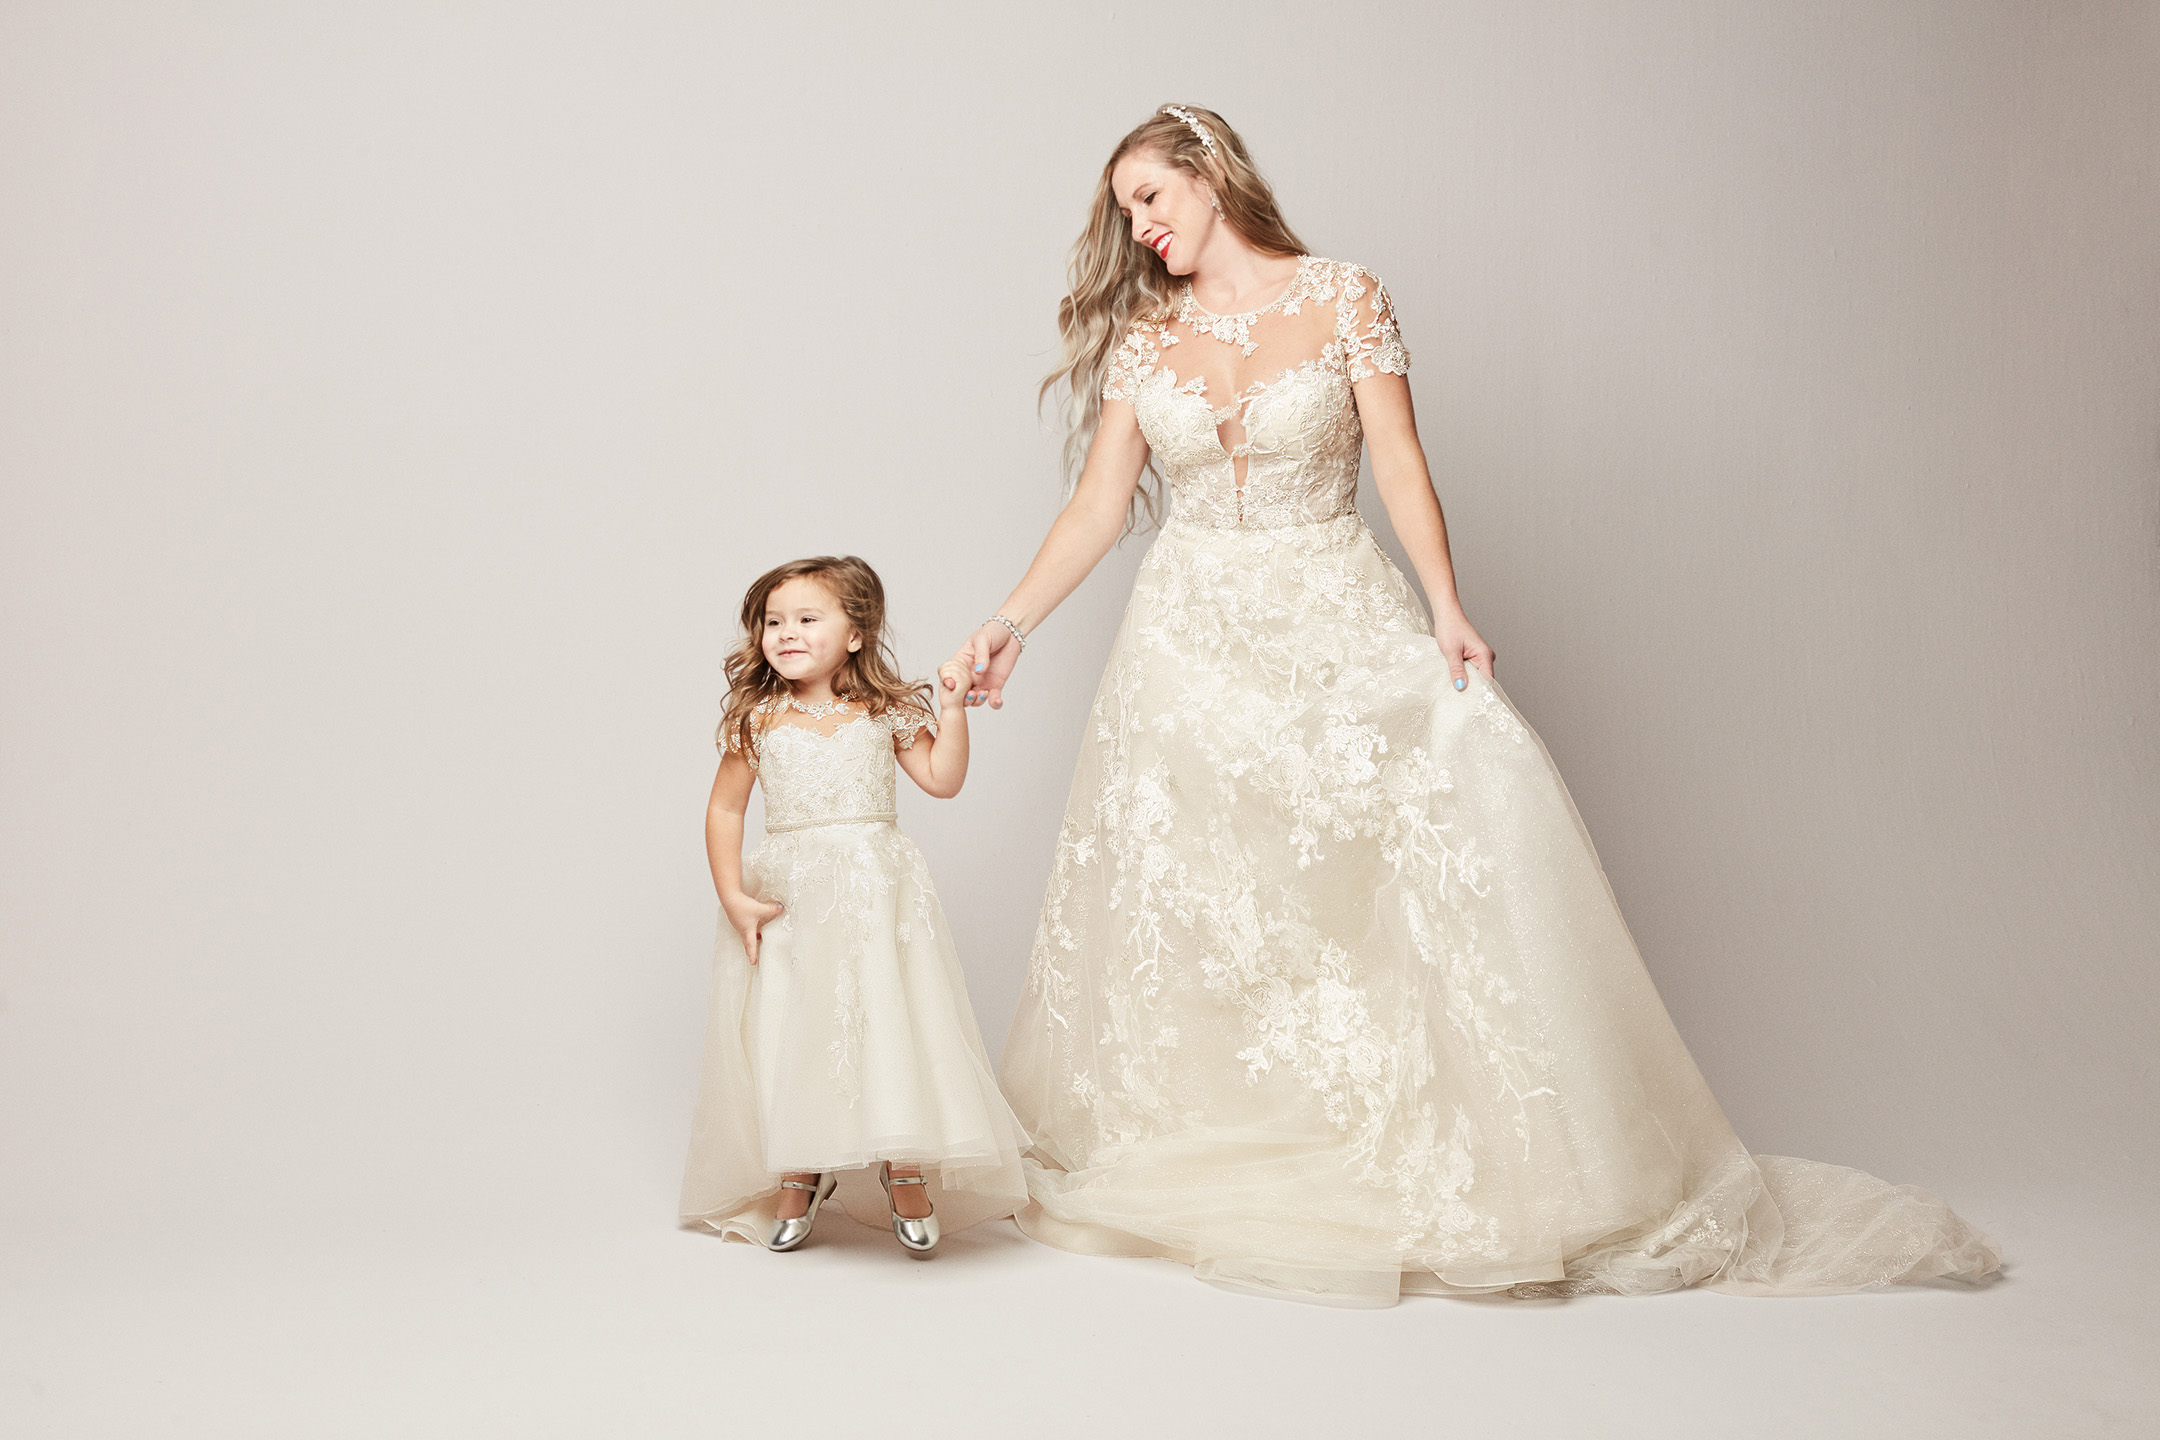 Matching floral wedding and flowergirl dresses
